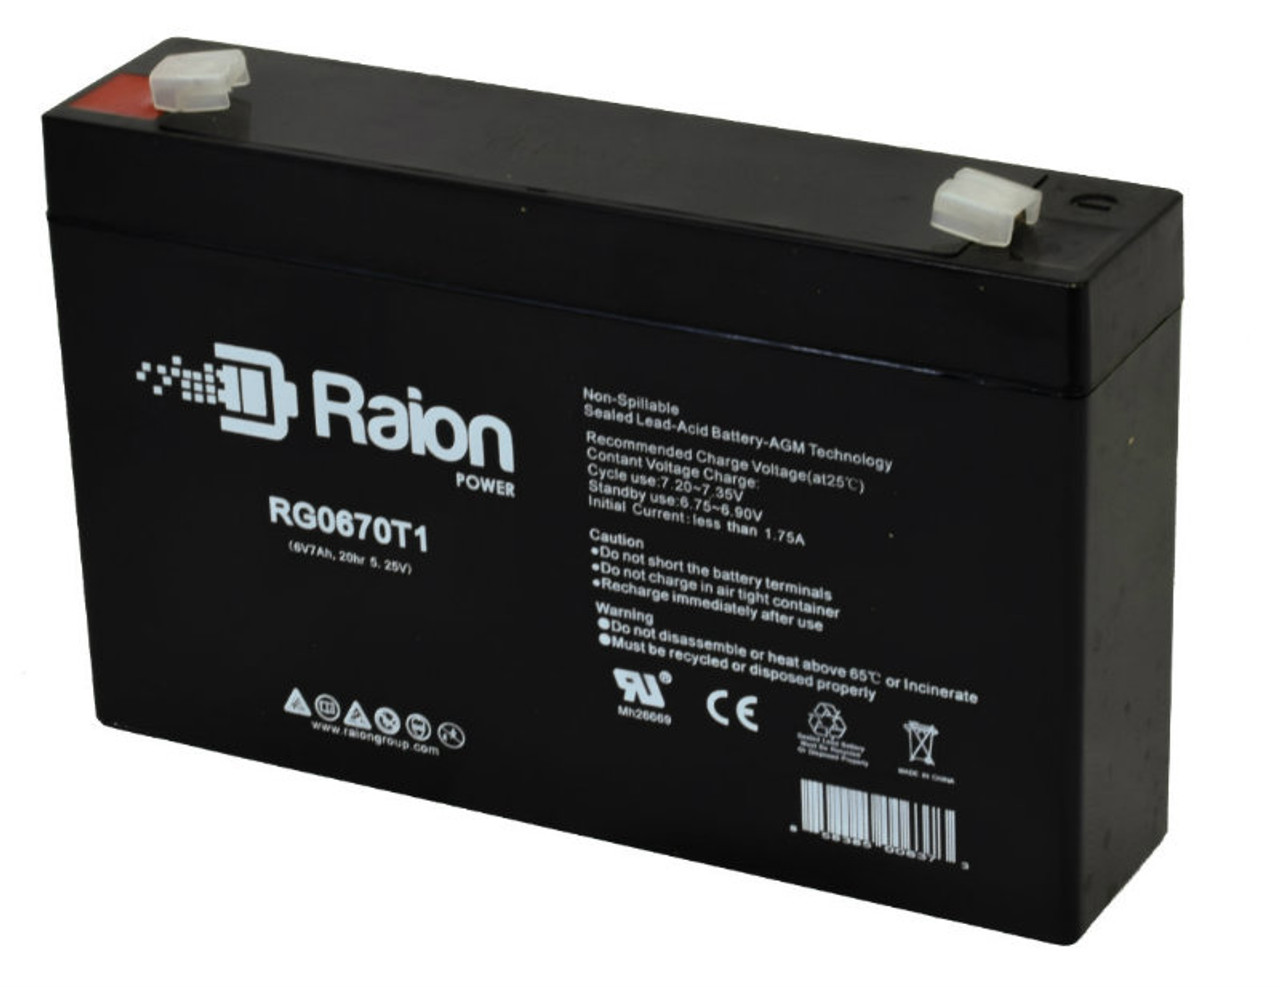 Raion Power RG0670T1 Replacement Battery for Ostar Power OP670E OEM Battery